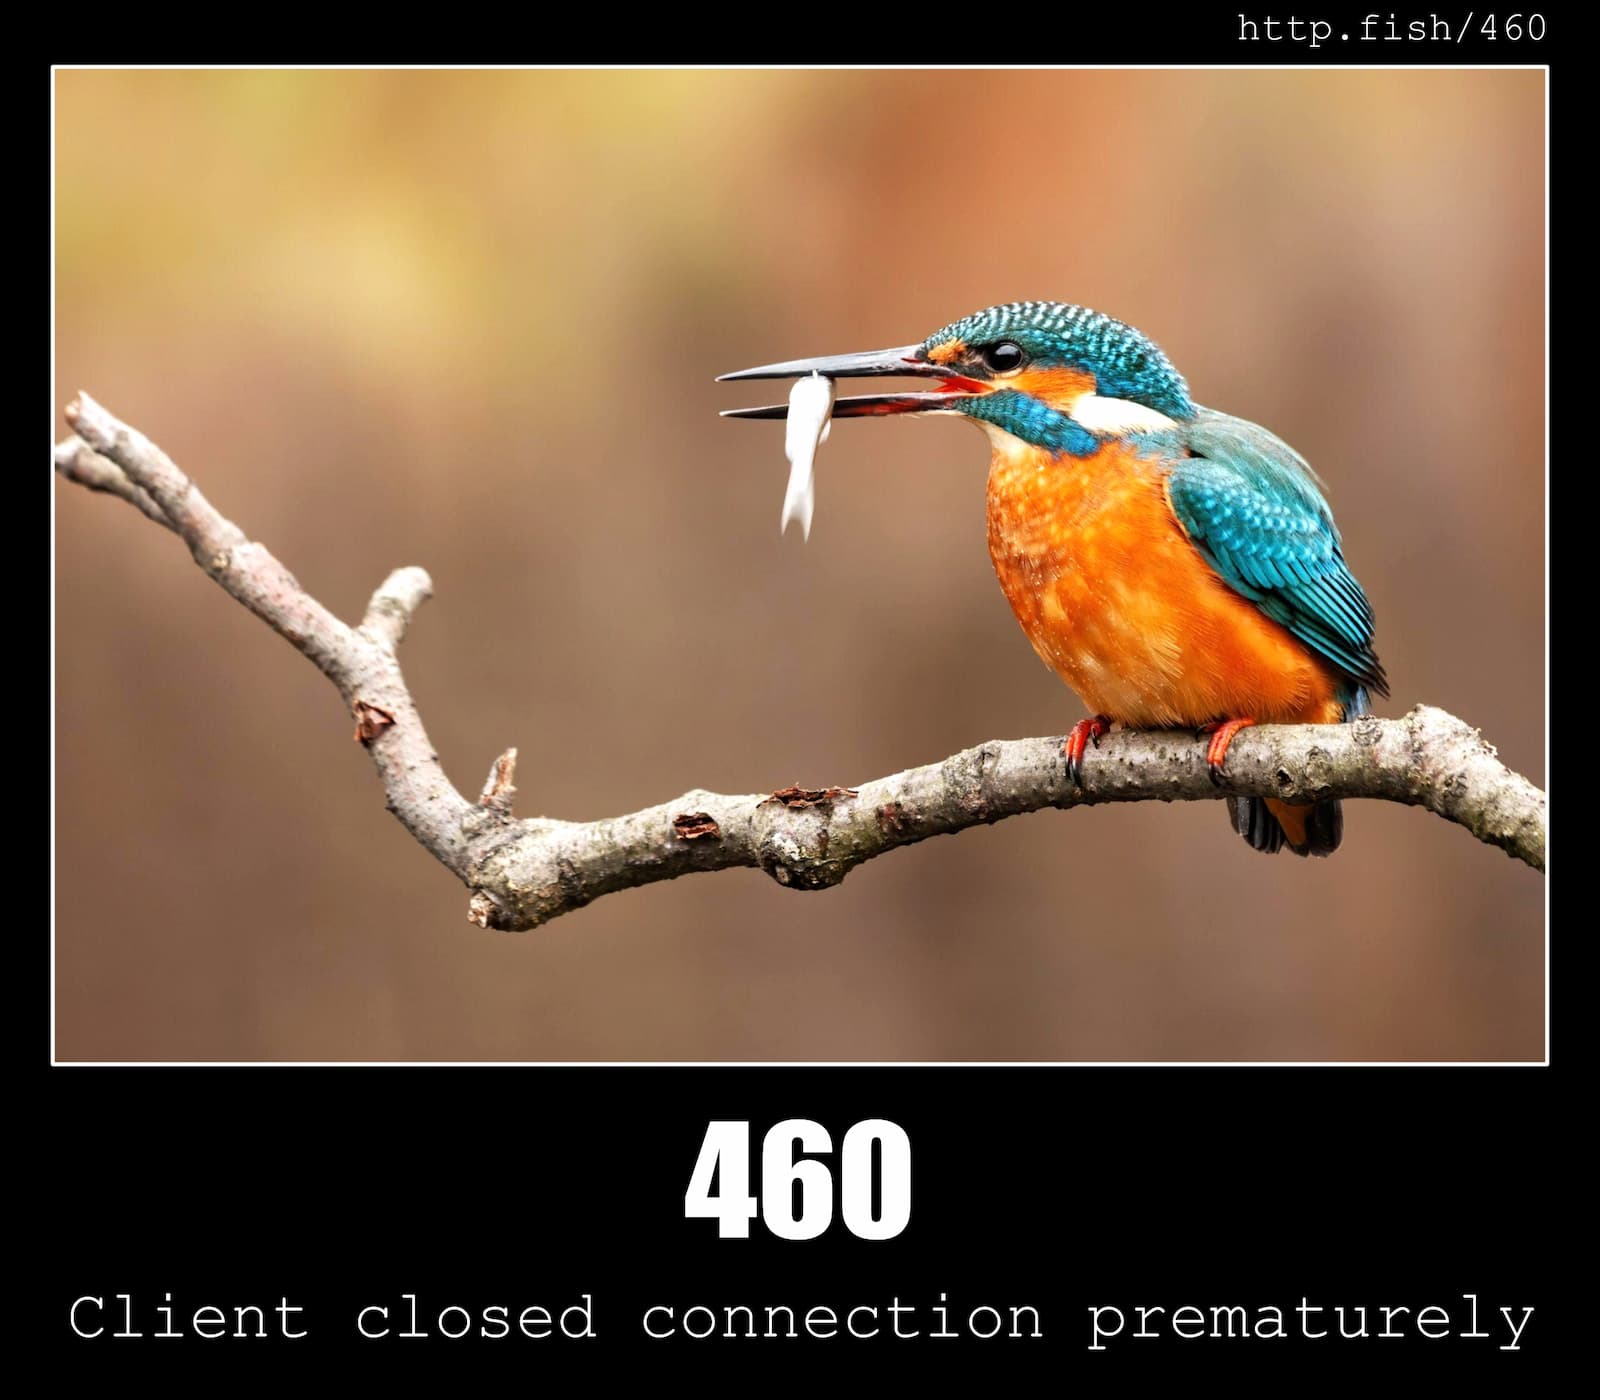 HTTP Status Code 460 Client closed connection prematurely & Fish